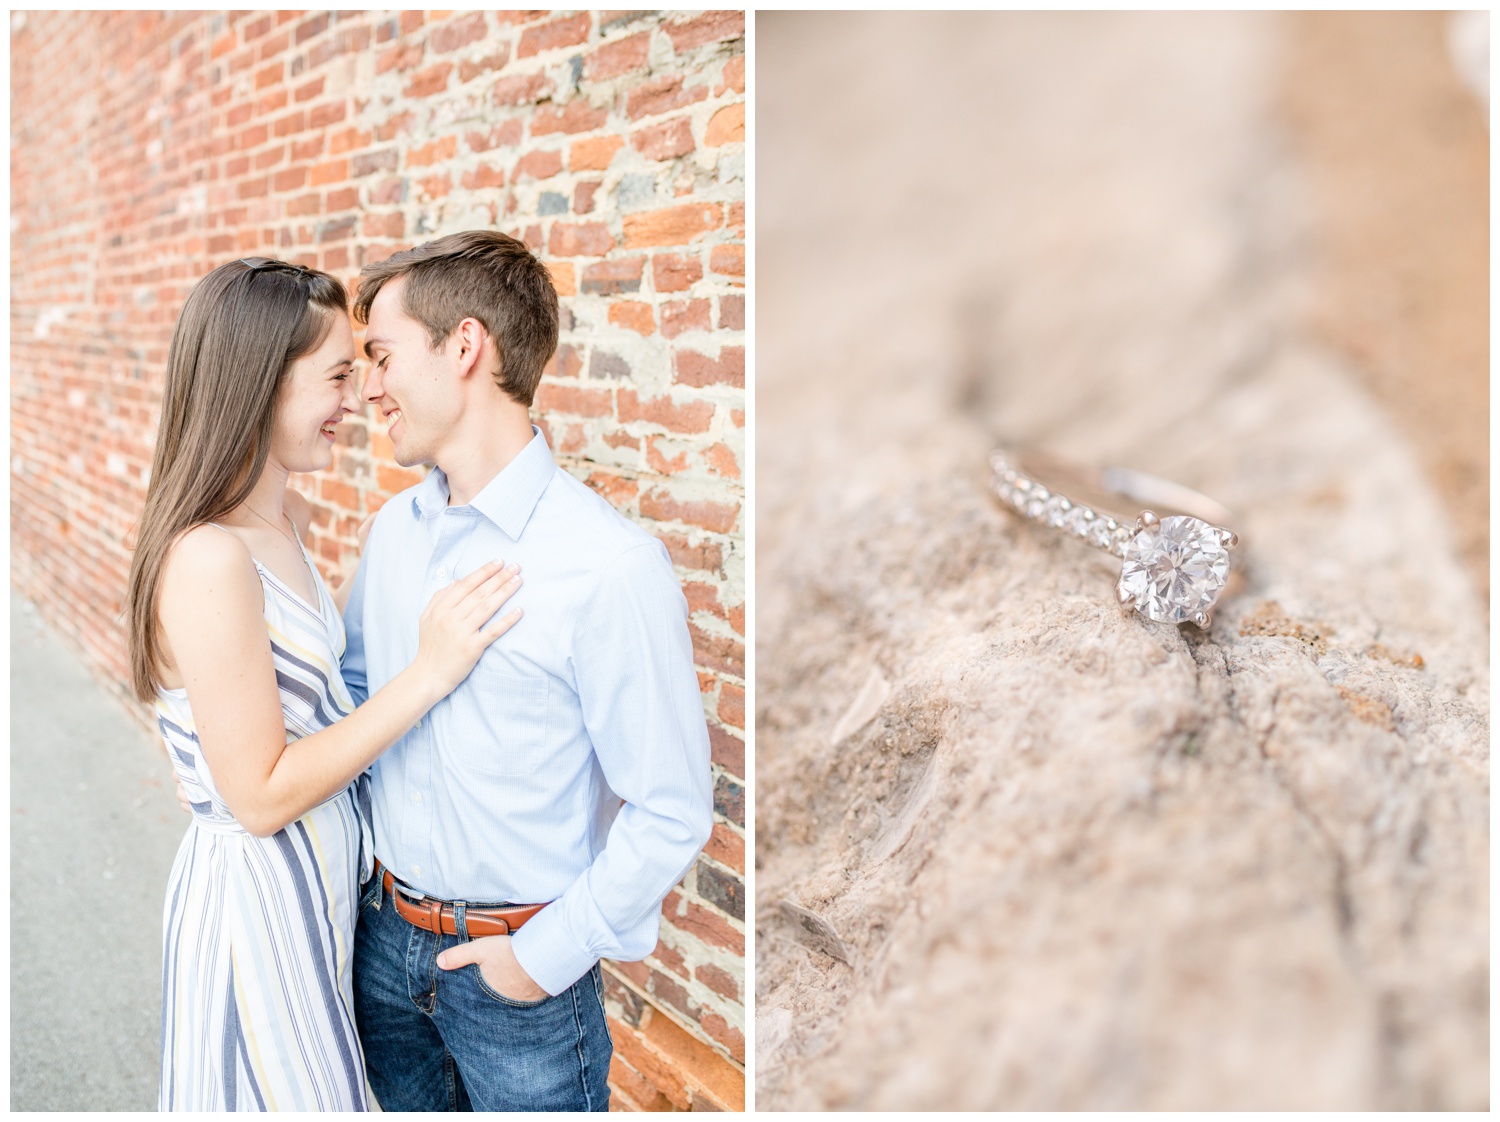 Engaged Couple - Engagement Ring - Engagement Pictures